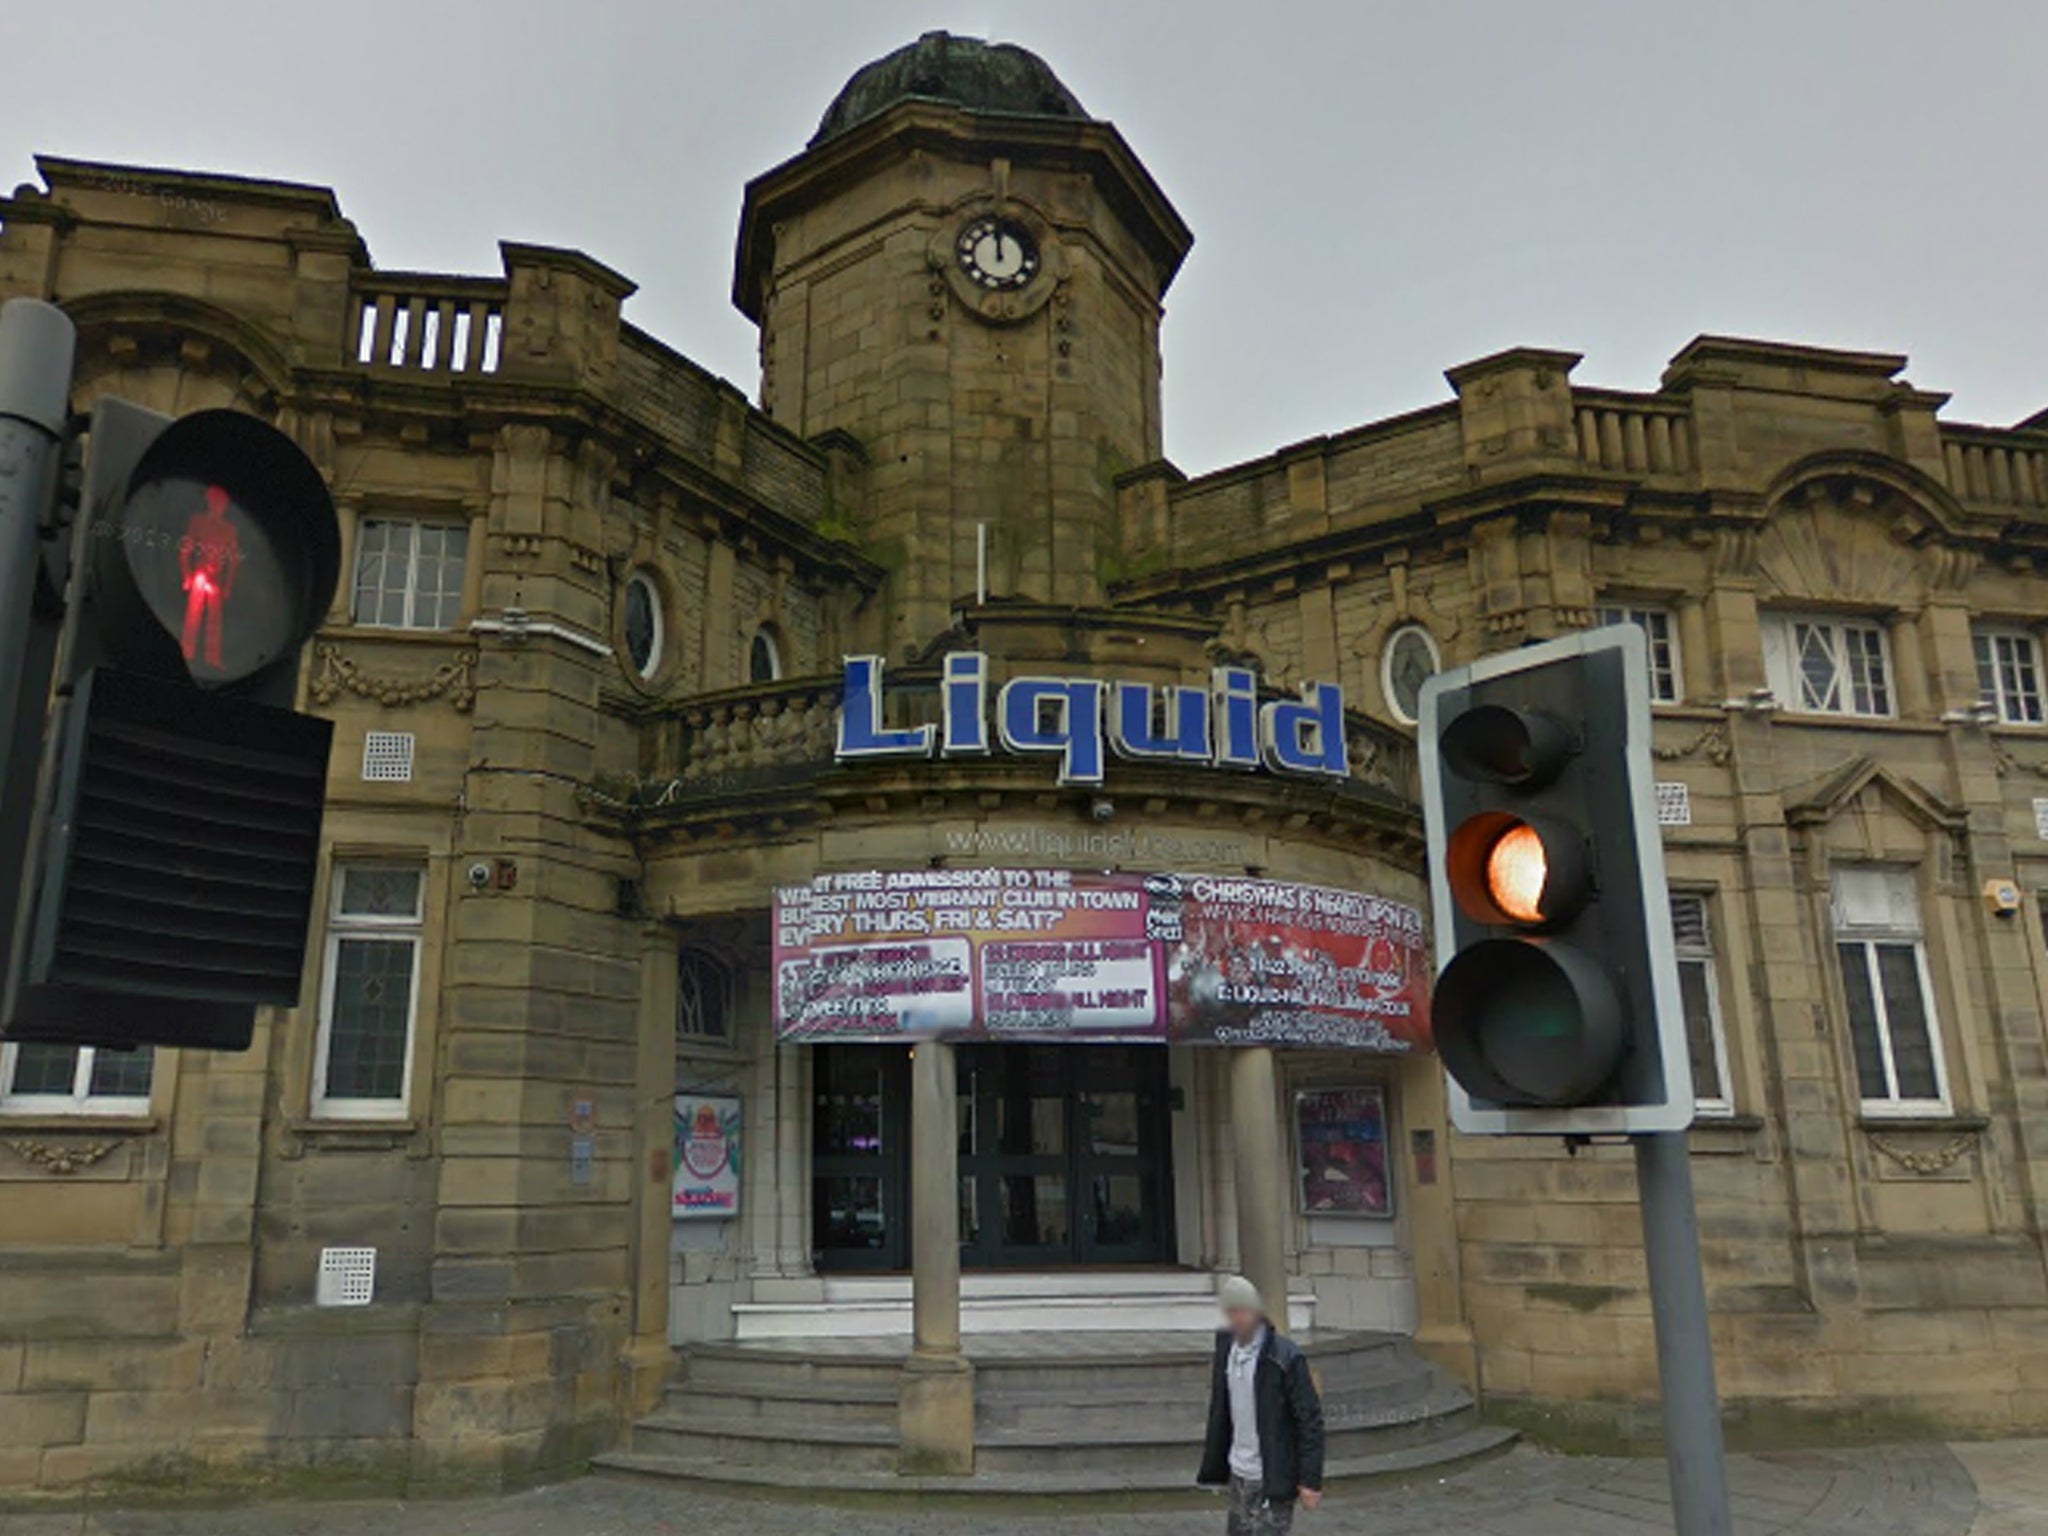 Man Dies After Being Hit With Single Punch At Halifax Nightclub